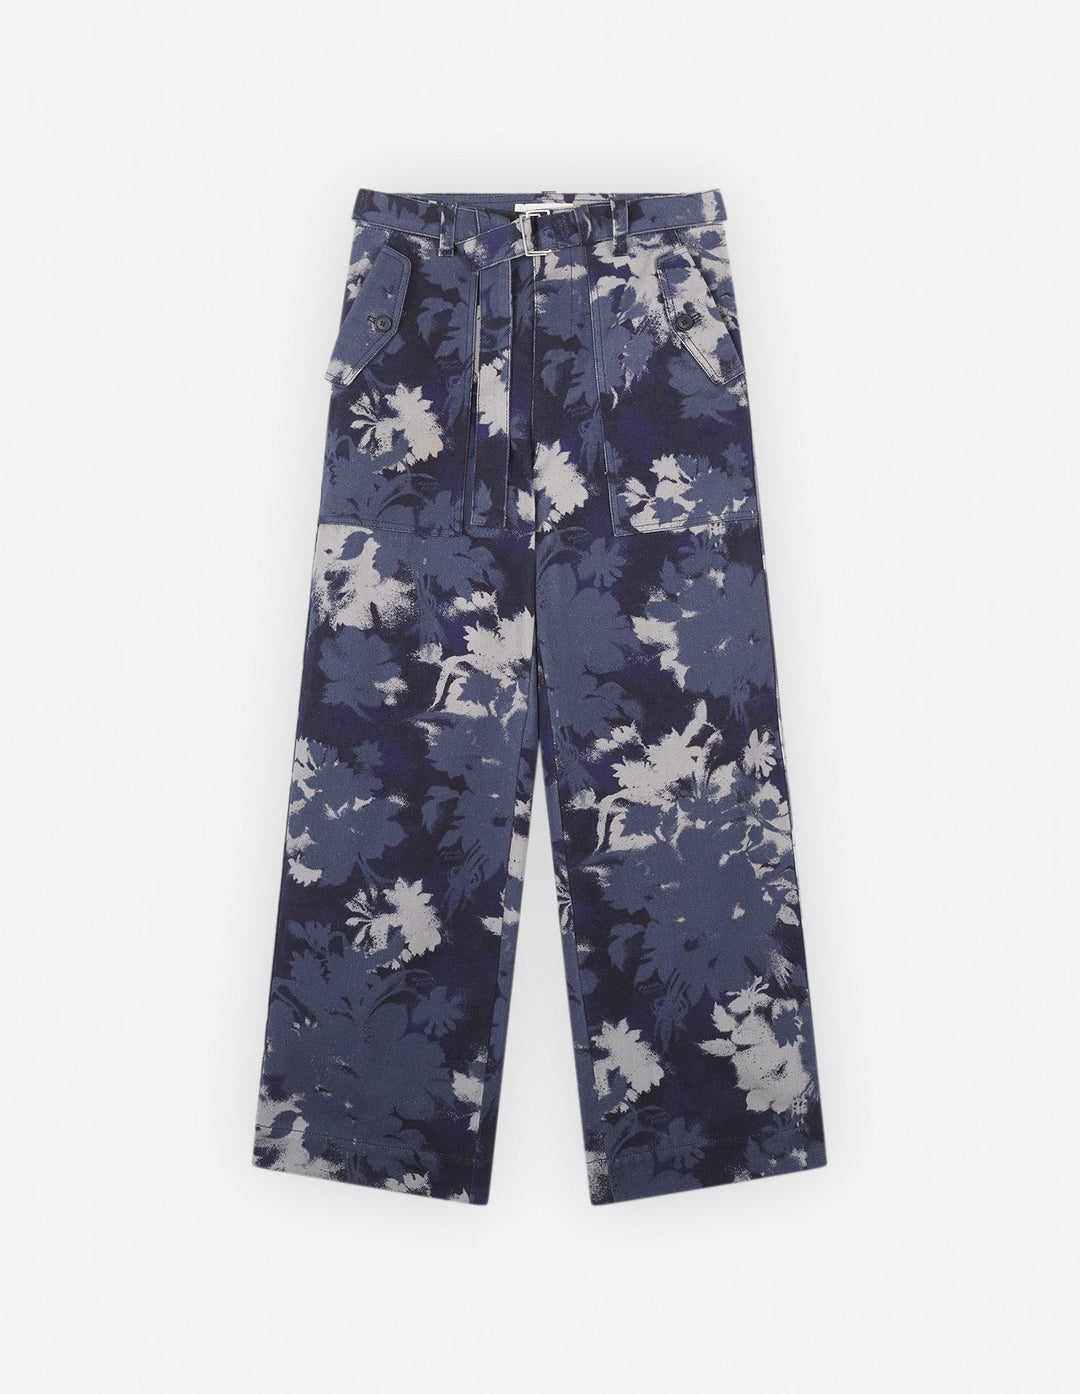 WORKWEAR PANTS IN BOUQUET CAMEO PRINTED COTTON DRI